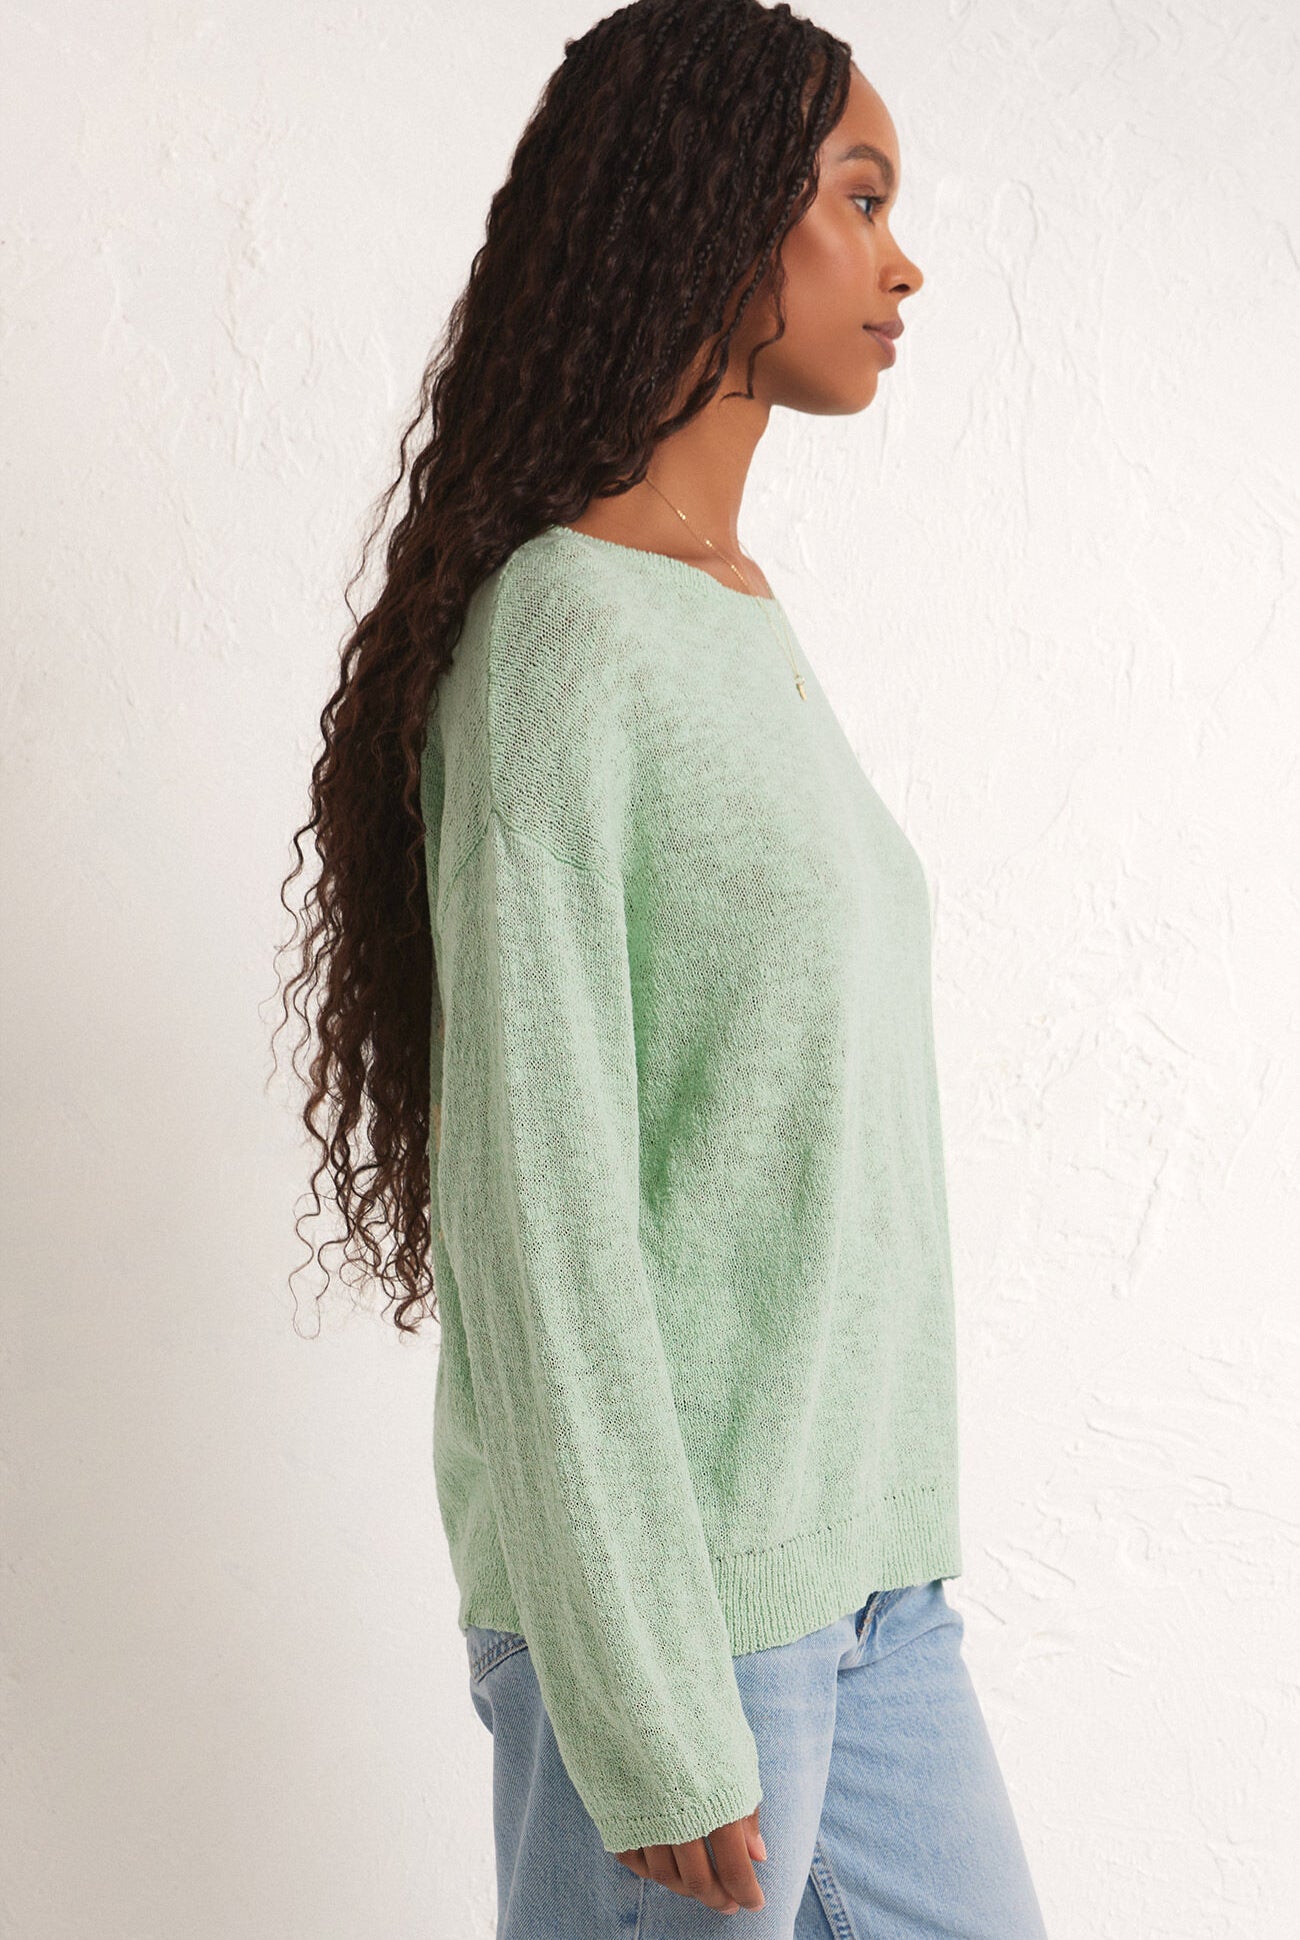 Sunny Days Only Sweater-Sweaters-Vixen Collection, Day Spa and Women's Boutique Located in Seattle, Washington